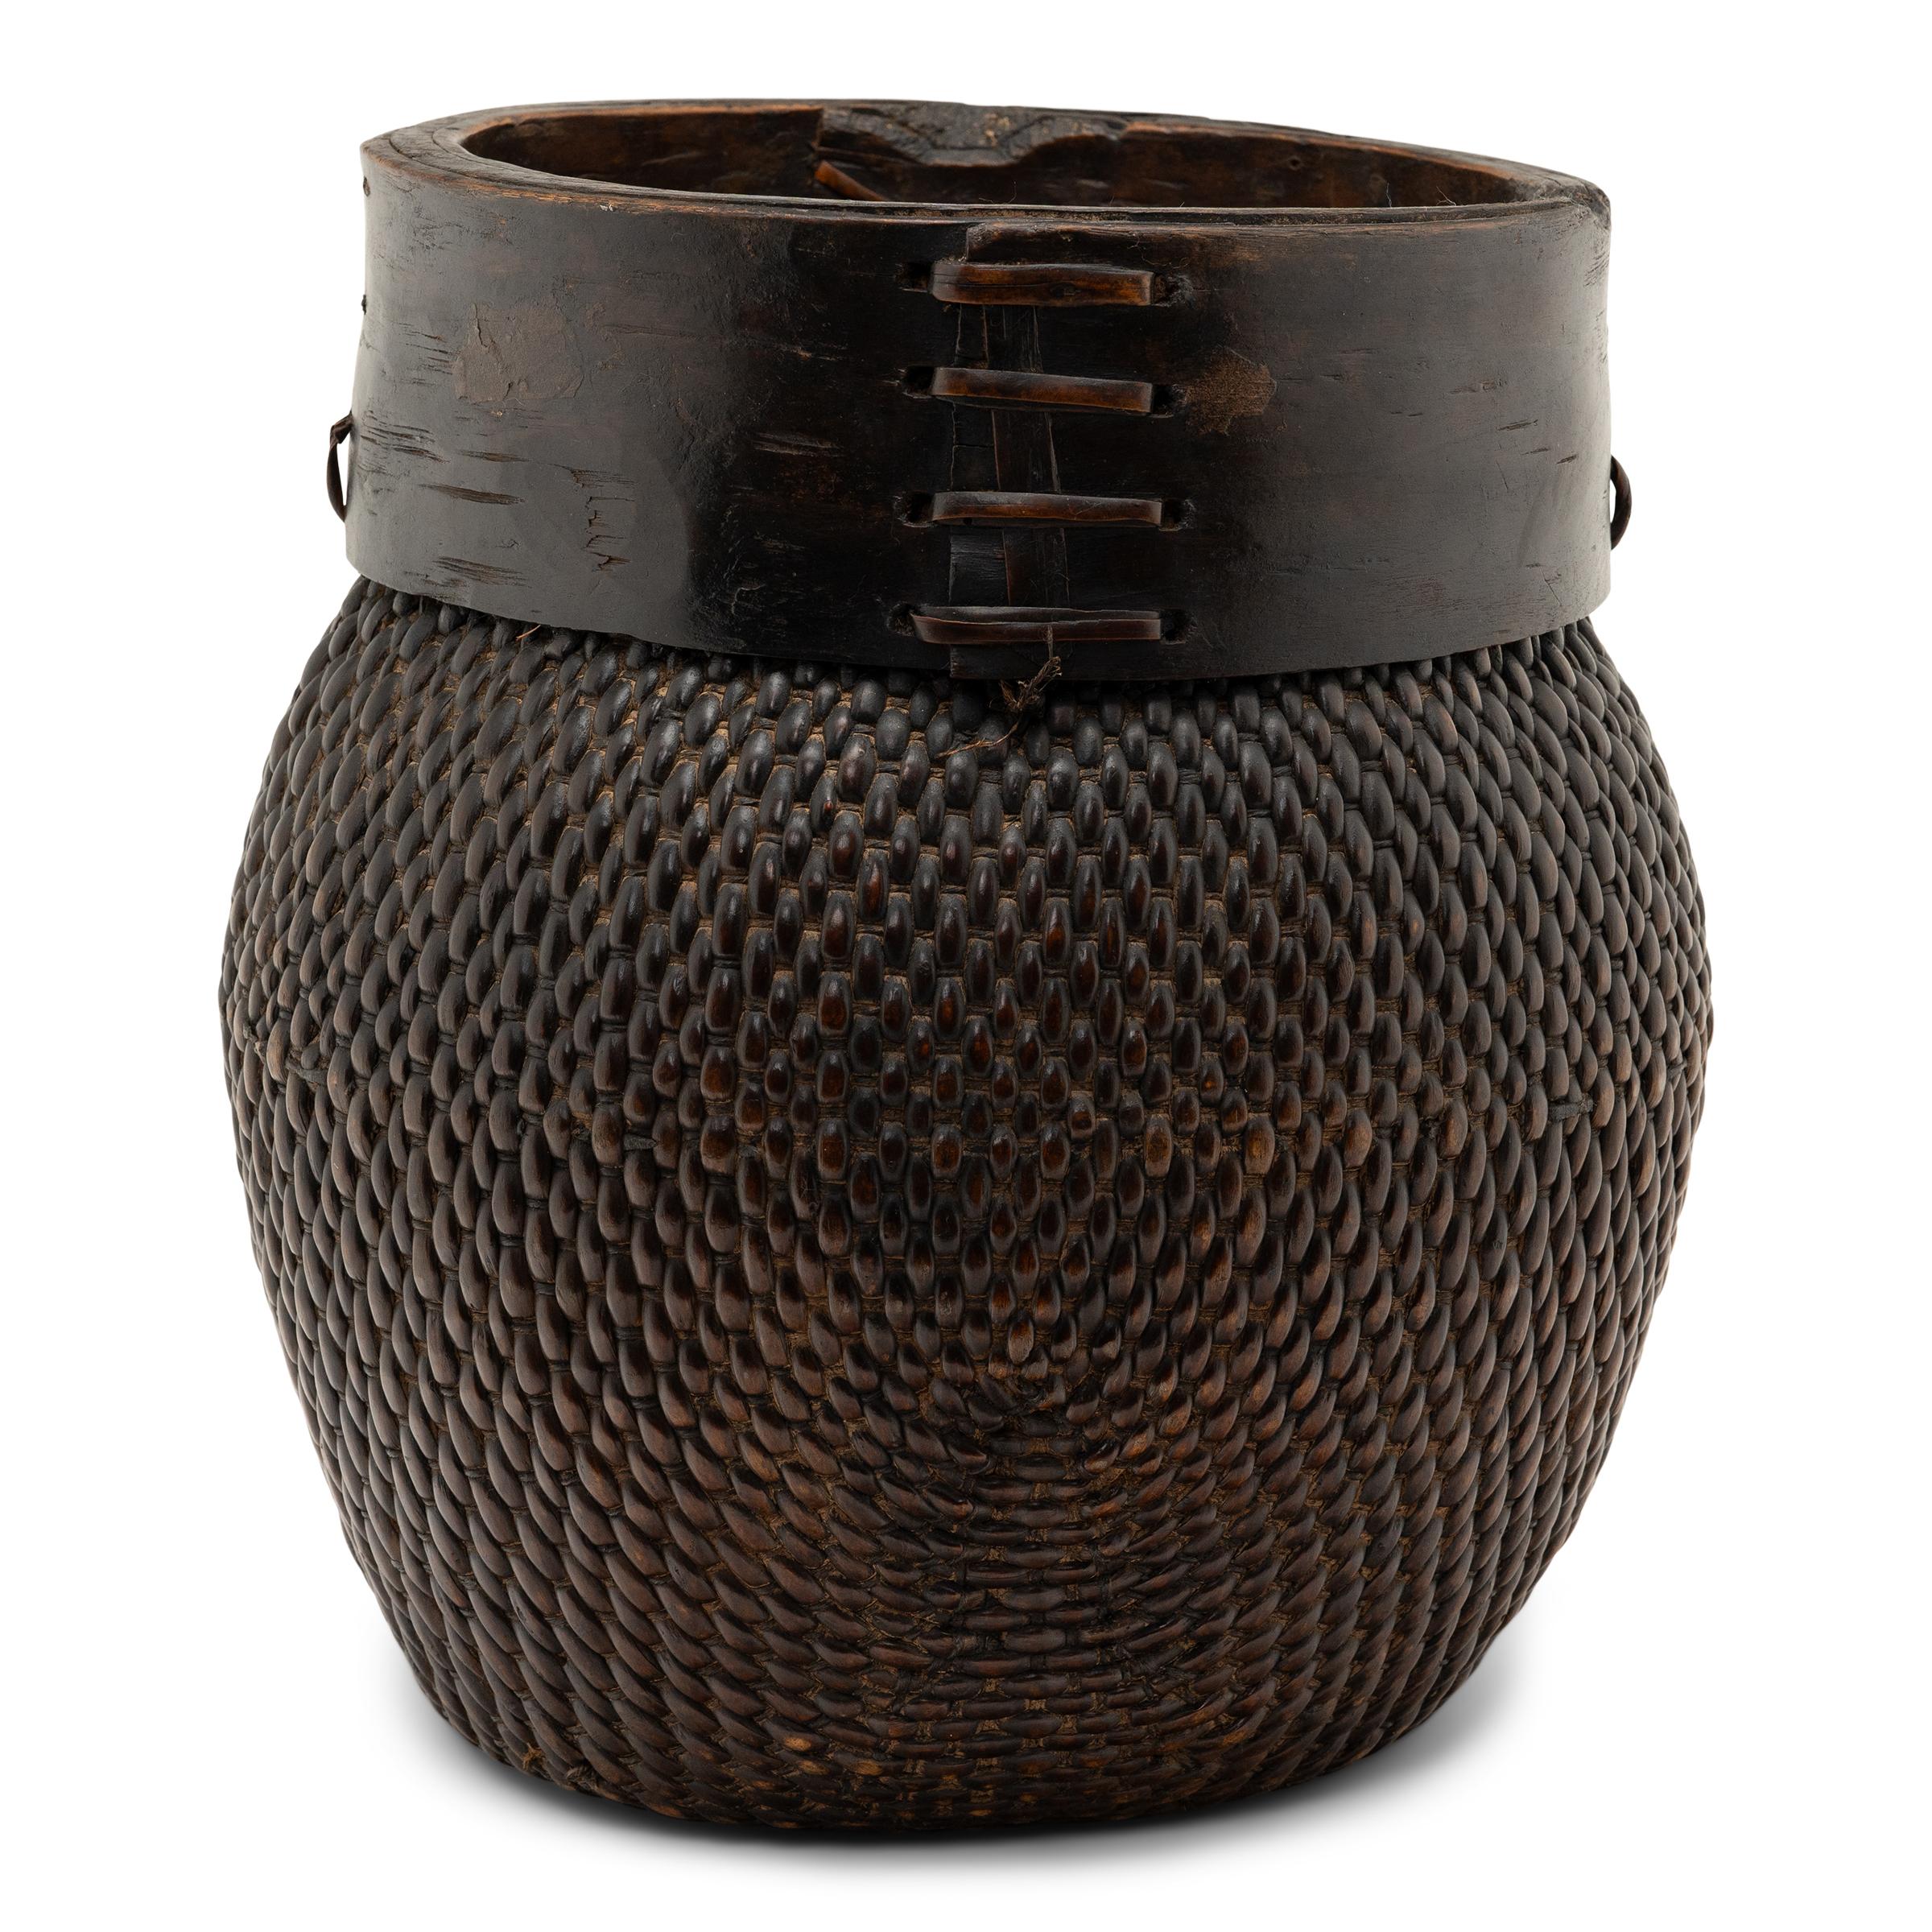 Centuries ago, a woven reed fisherman’s basket such as this would have been common in rural China as an everyday item, used until it became worn through. This particular example remains in beautiful condition, and exists today as a lovely